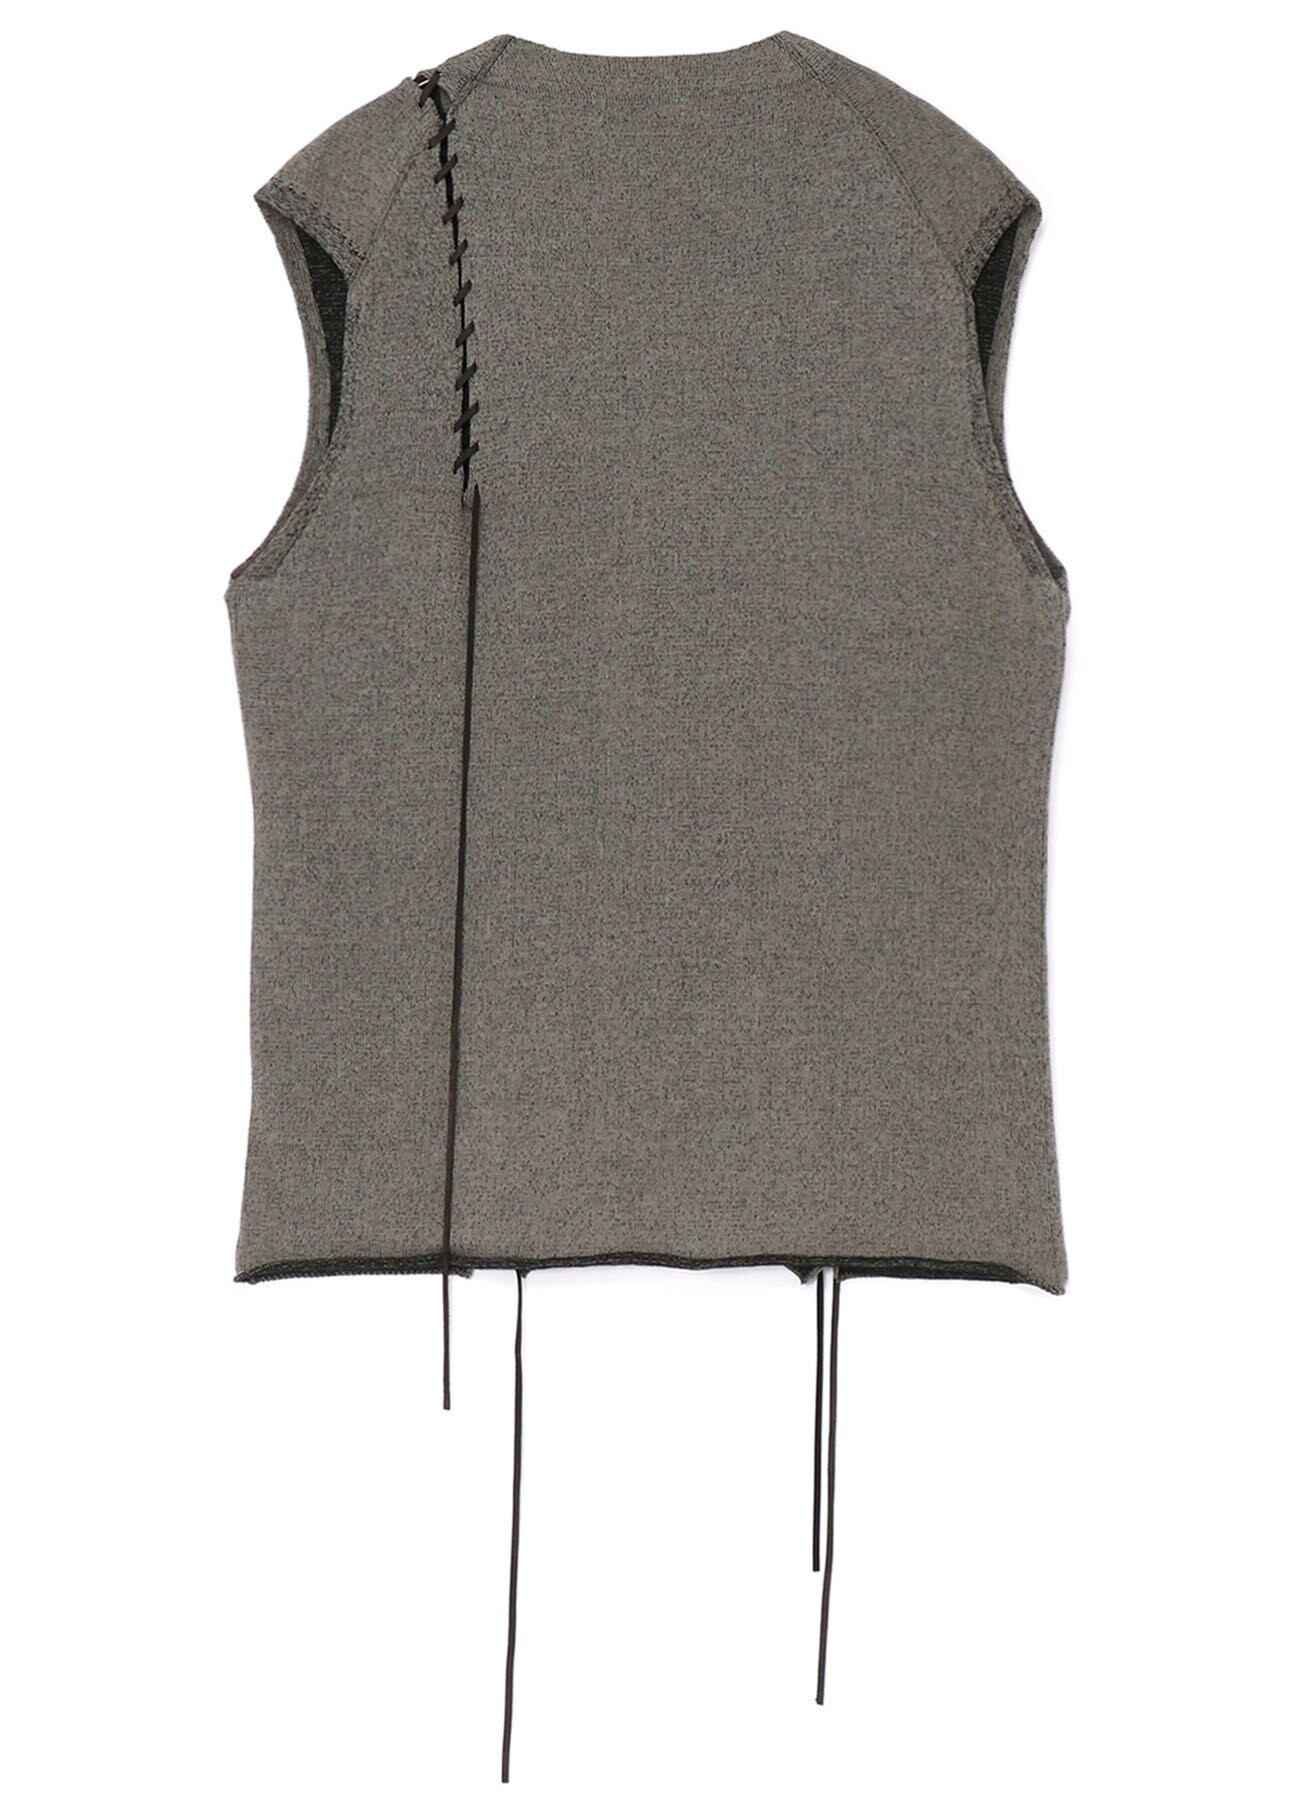 10G KNITTED VEST WITH LEATHER STRAP DETAILS